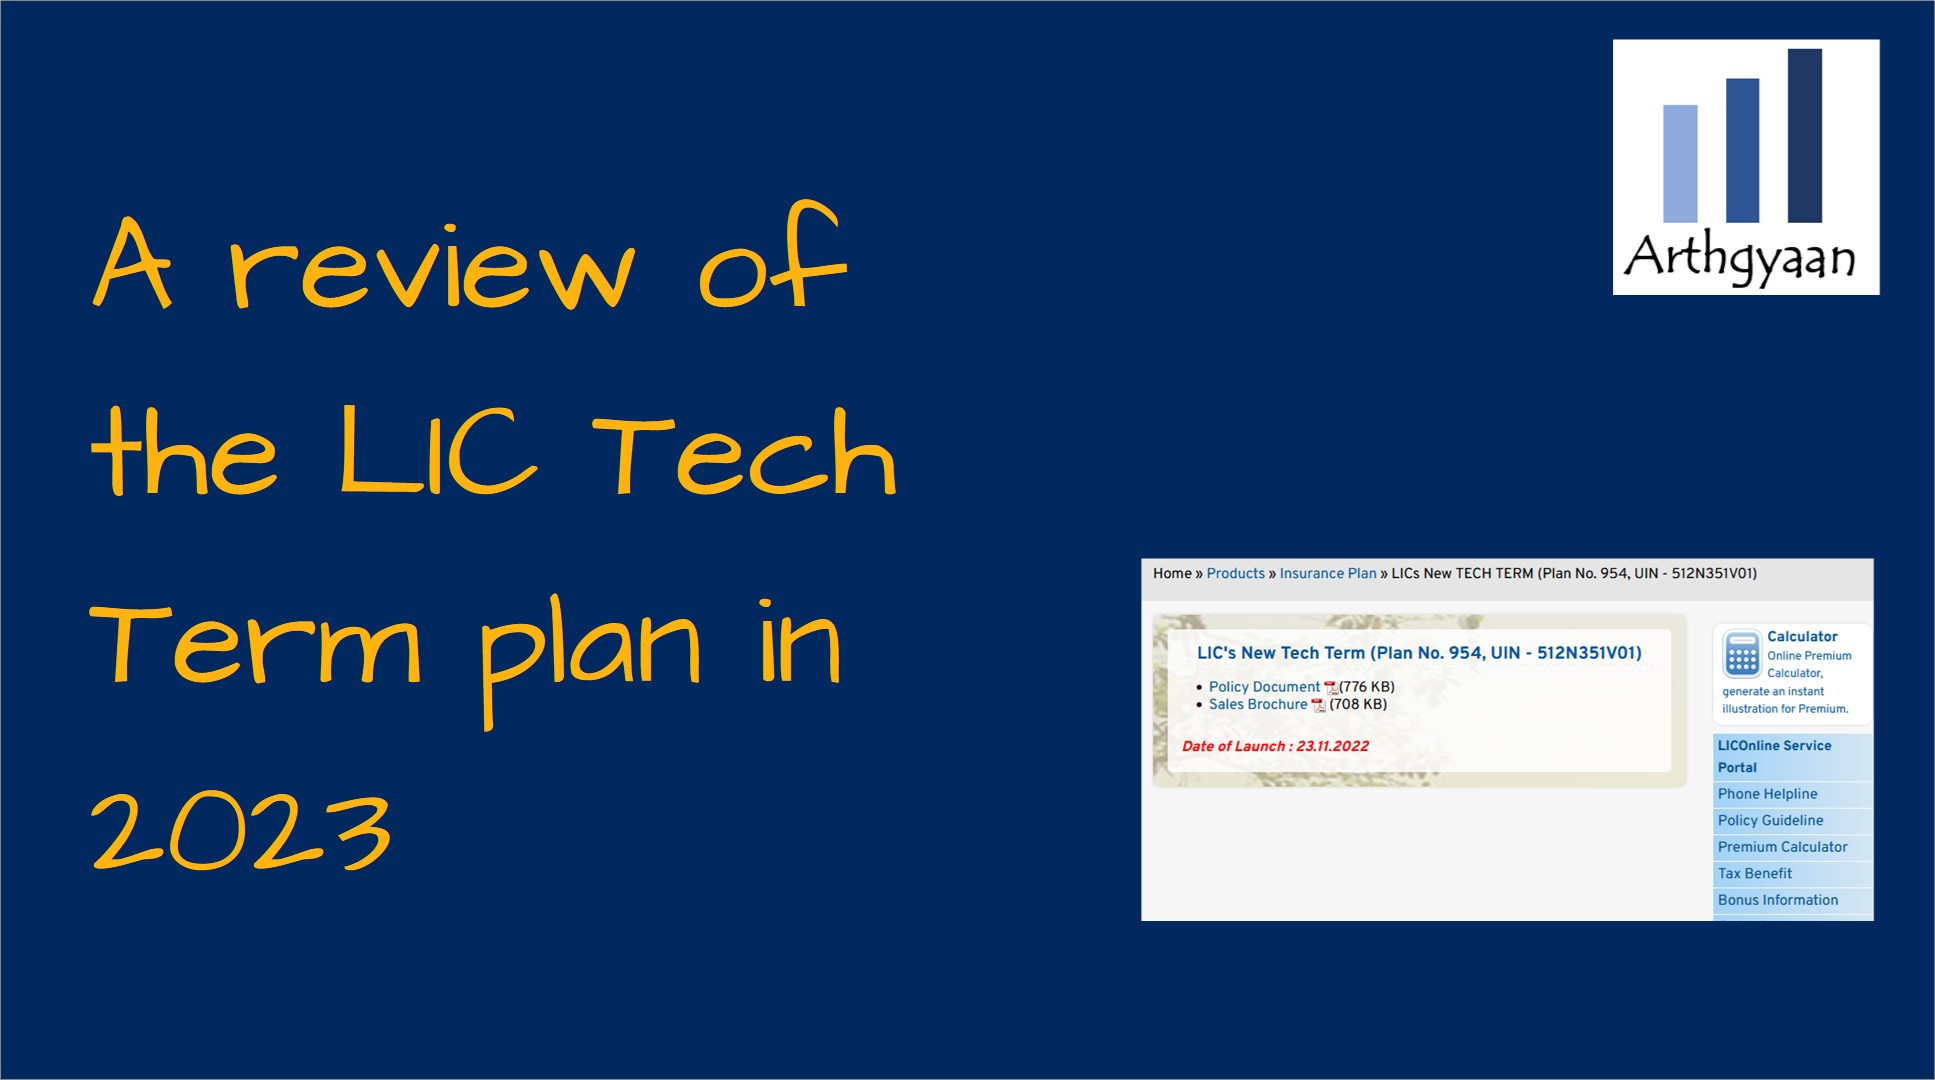 A review of the LIC Tech Term plan in 2023